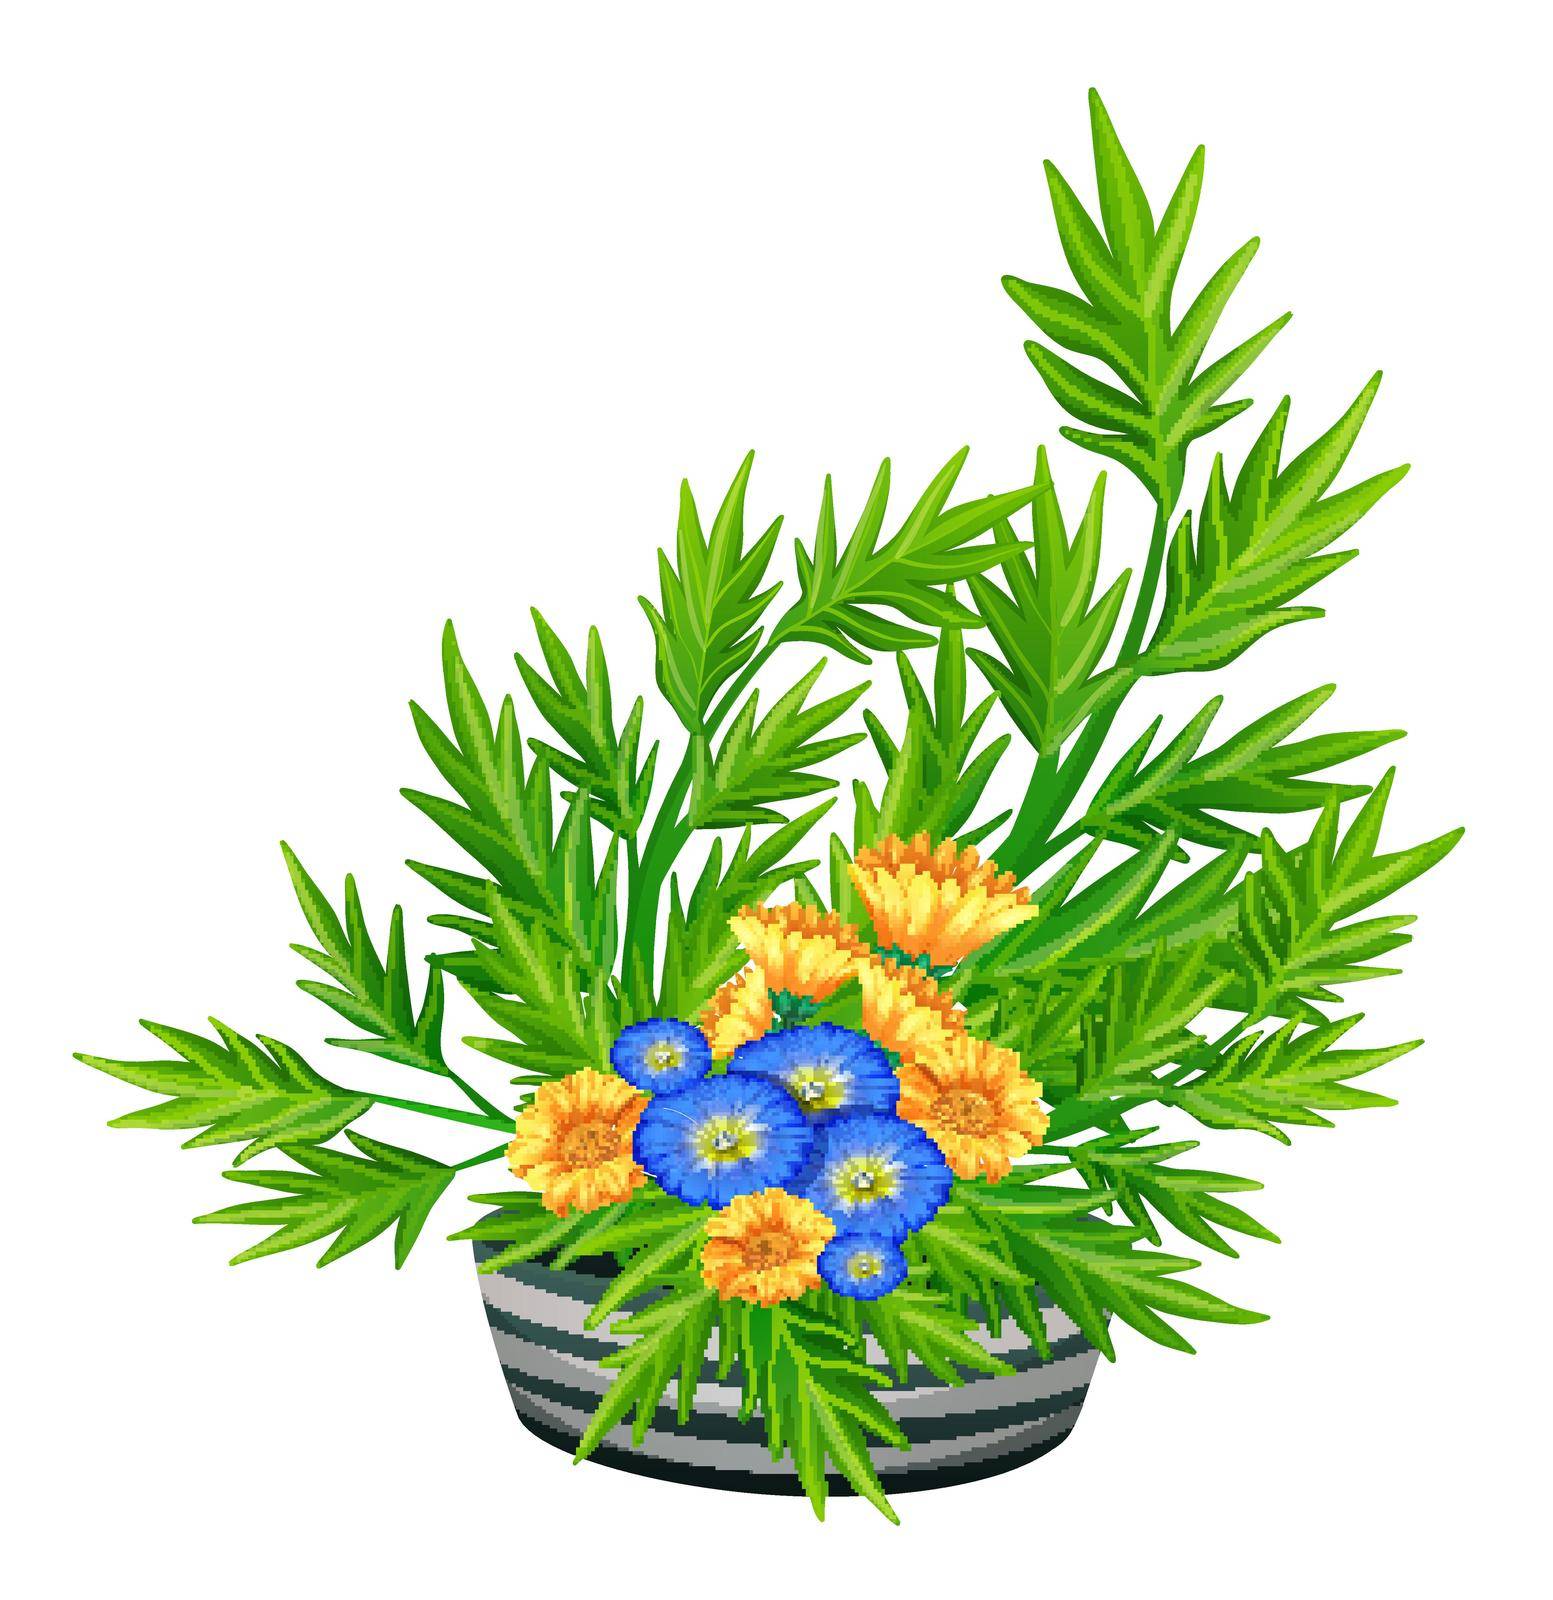 Decorated flowers in the bowl illustration